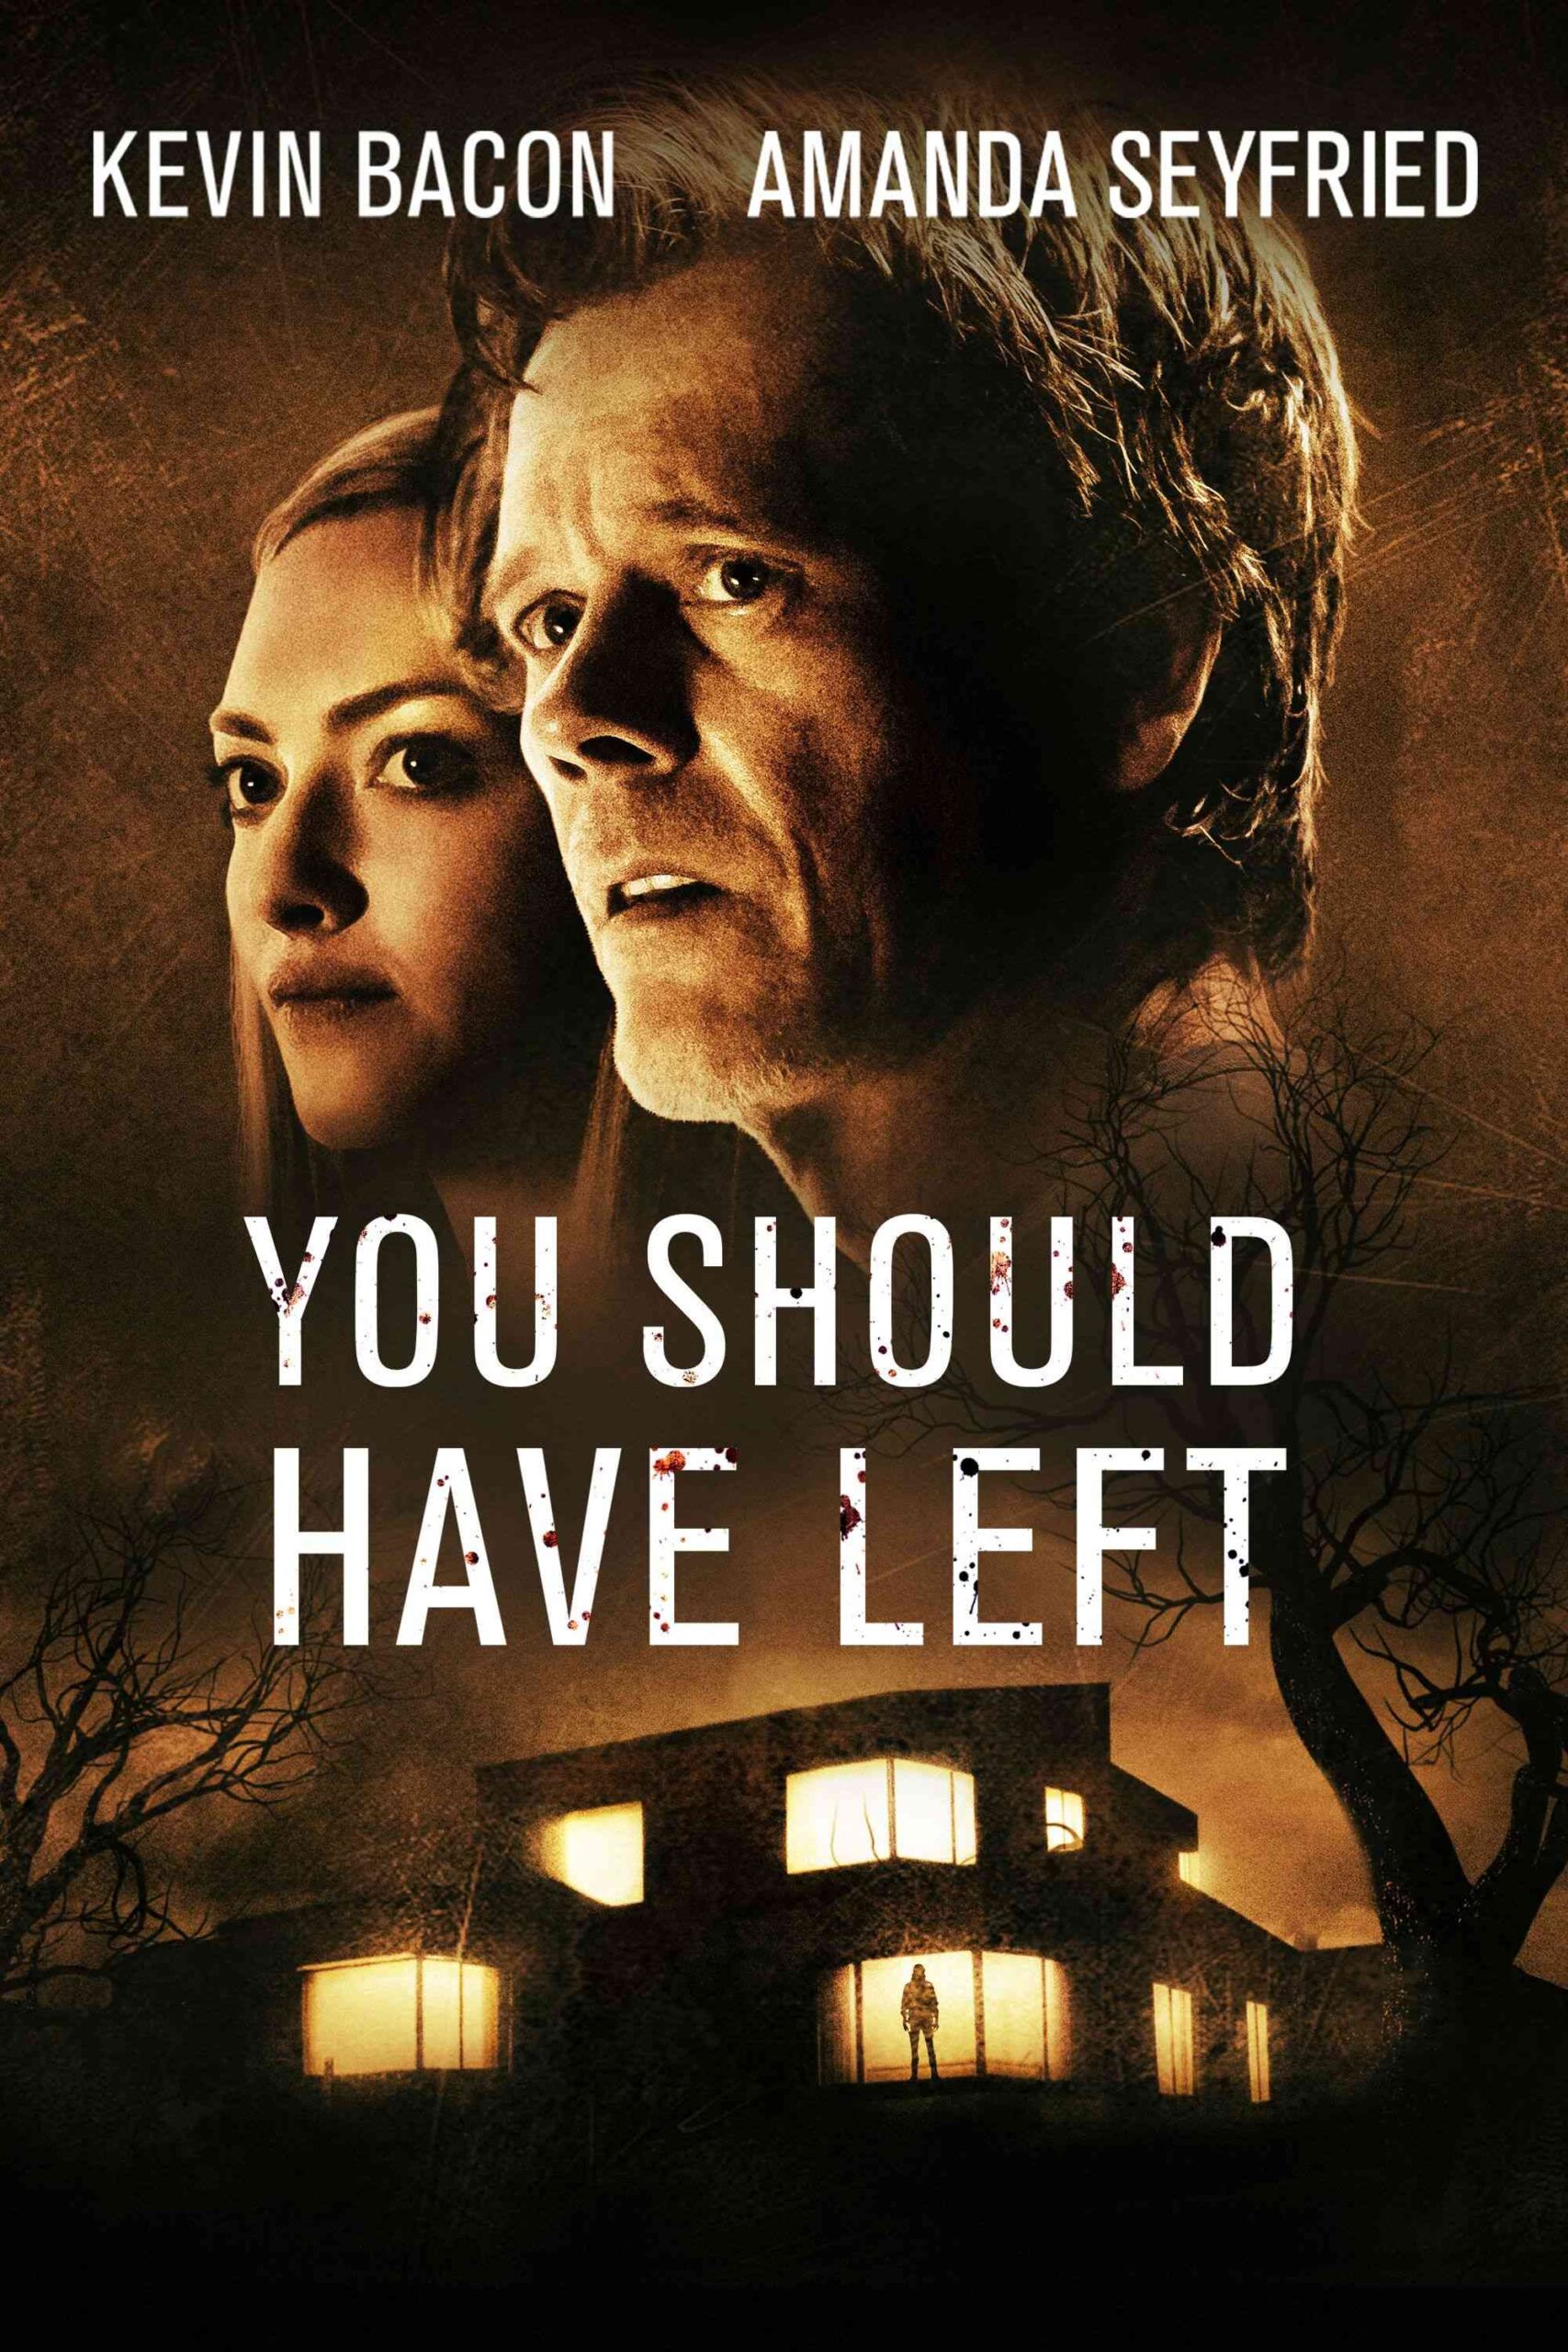 FULL MOVIE: You Should Have Left (2020)